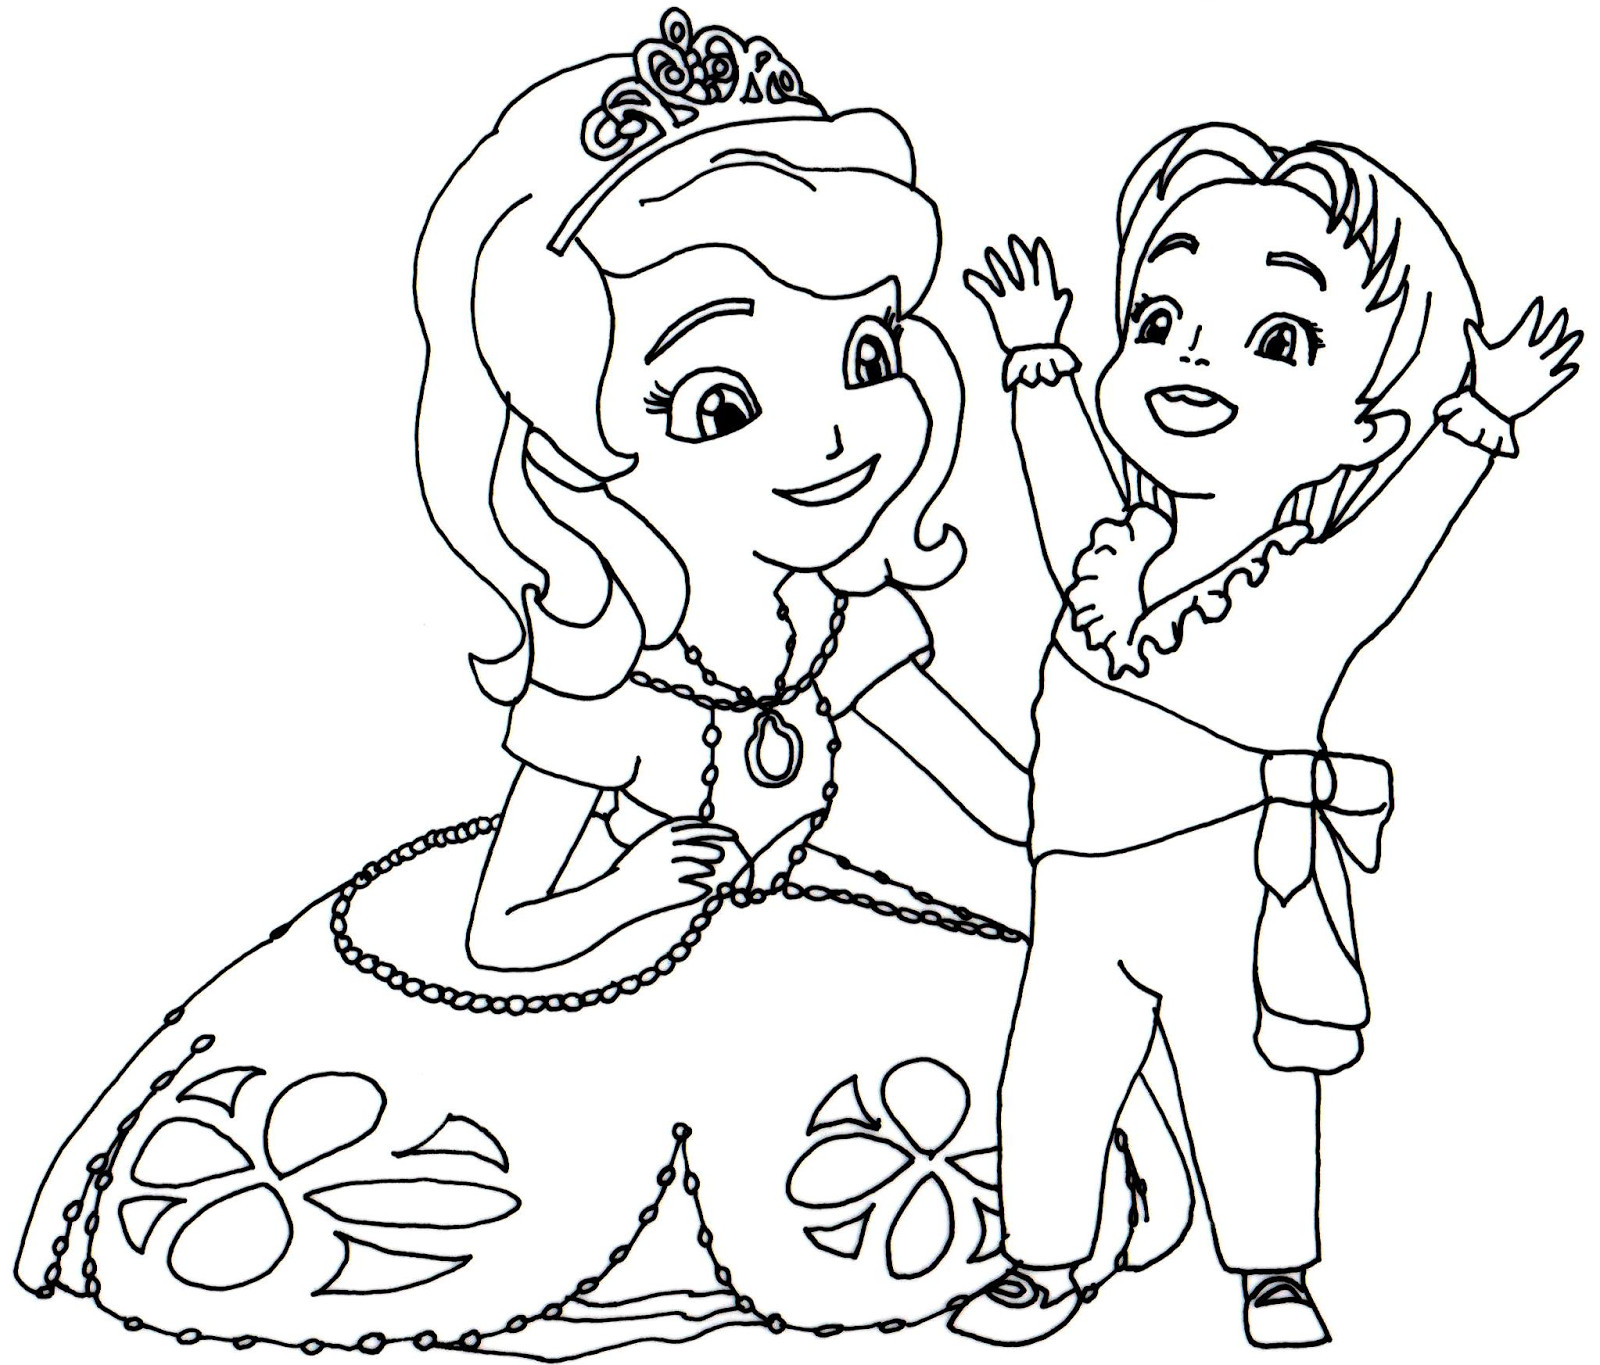 Sofia The First Coloring Pages
 Sofia The First Coloring Pages April 2014